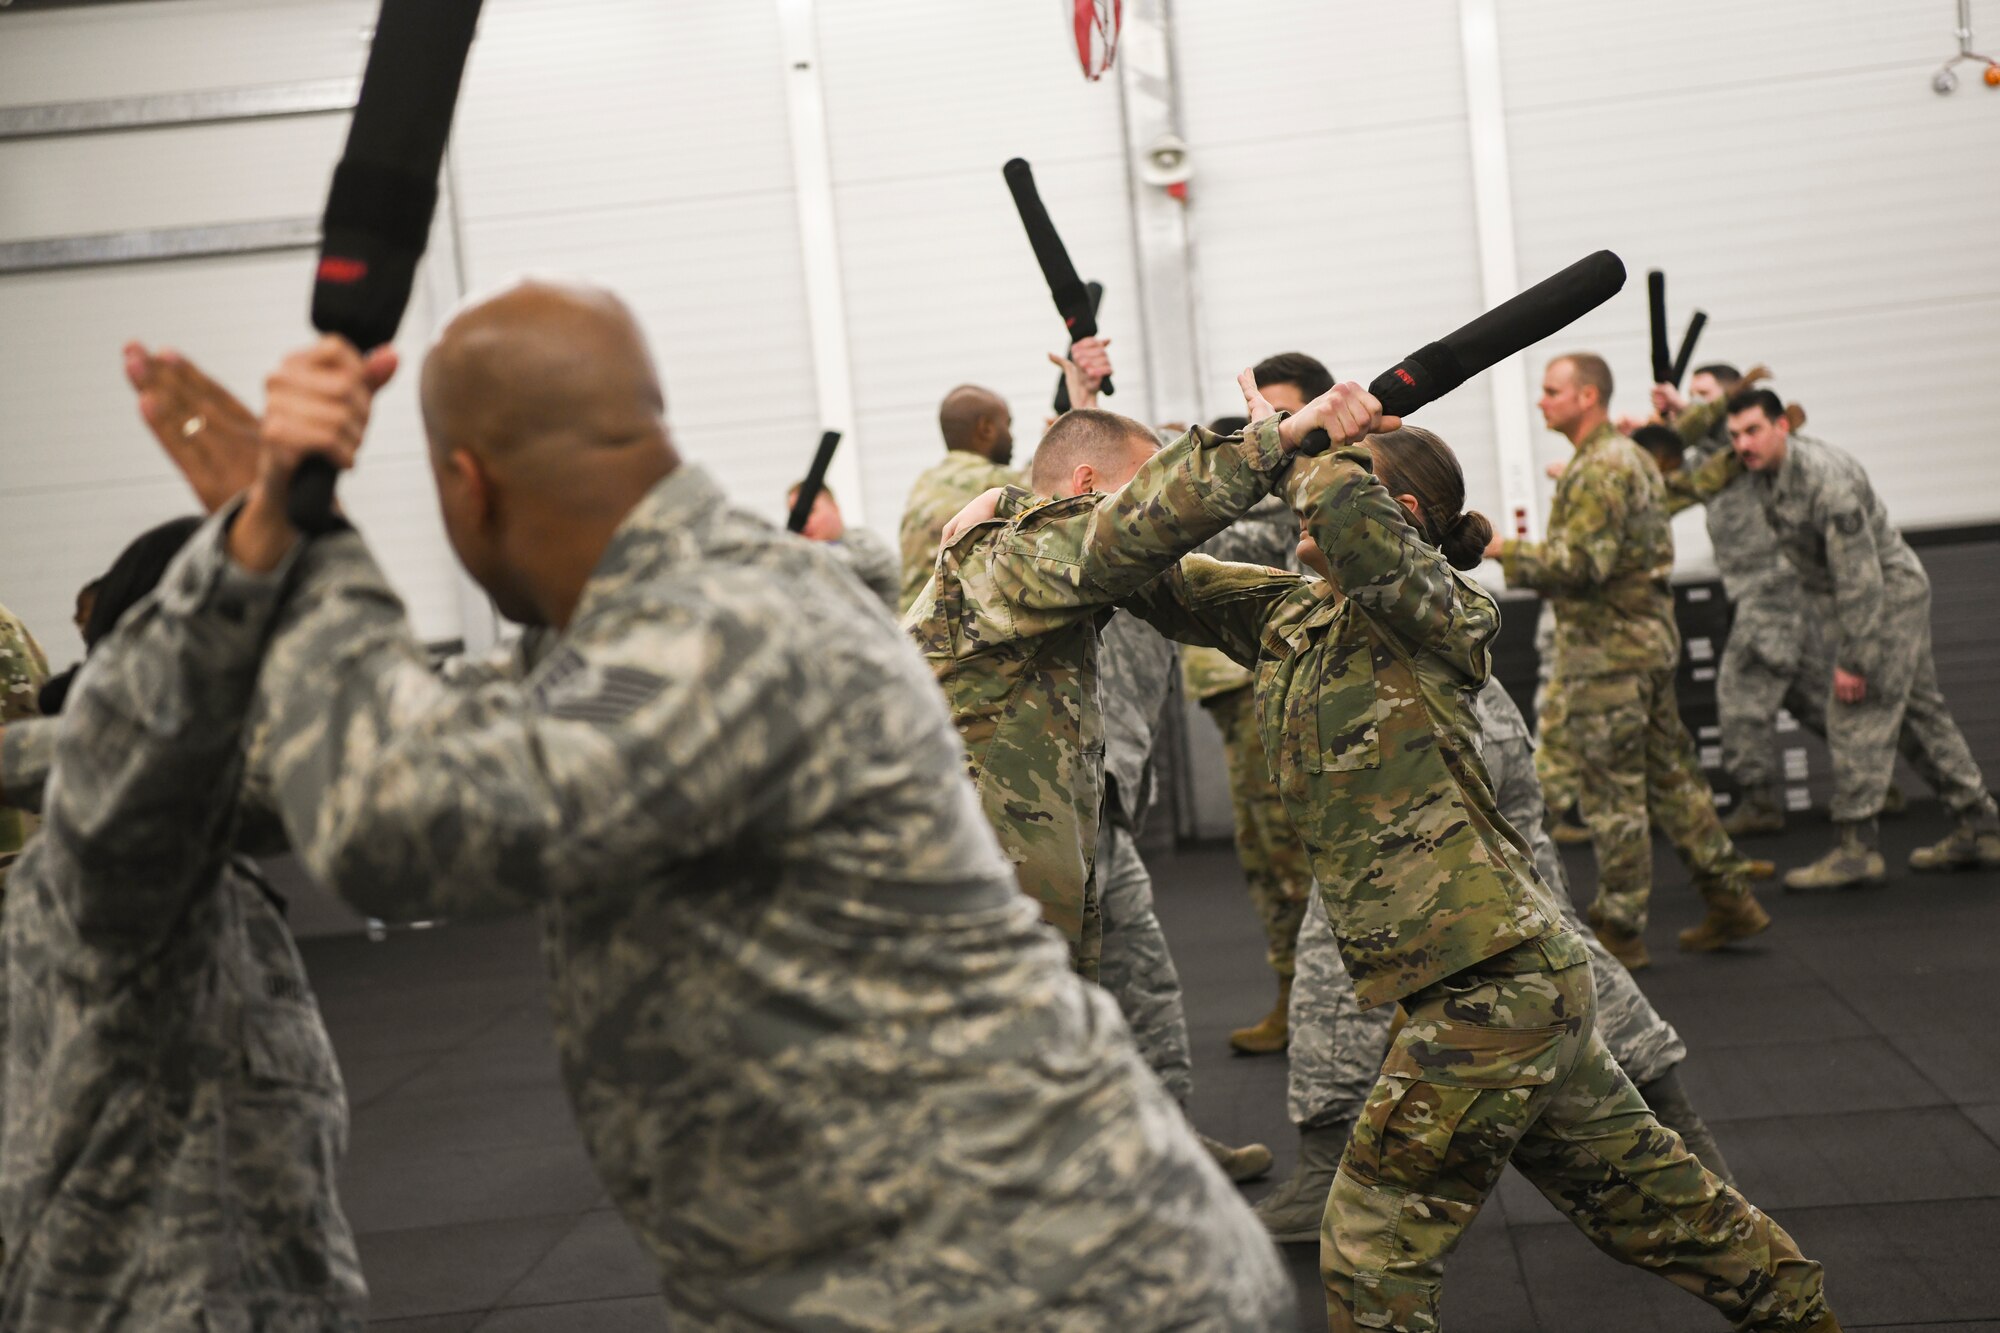 U.S. Airmen, Soldiers, and NATO service members practice Krav Maga, a form of self-defense.